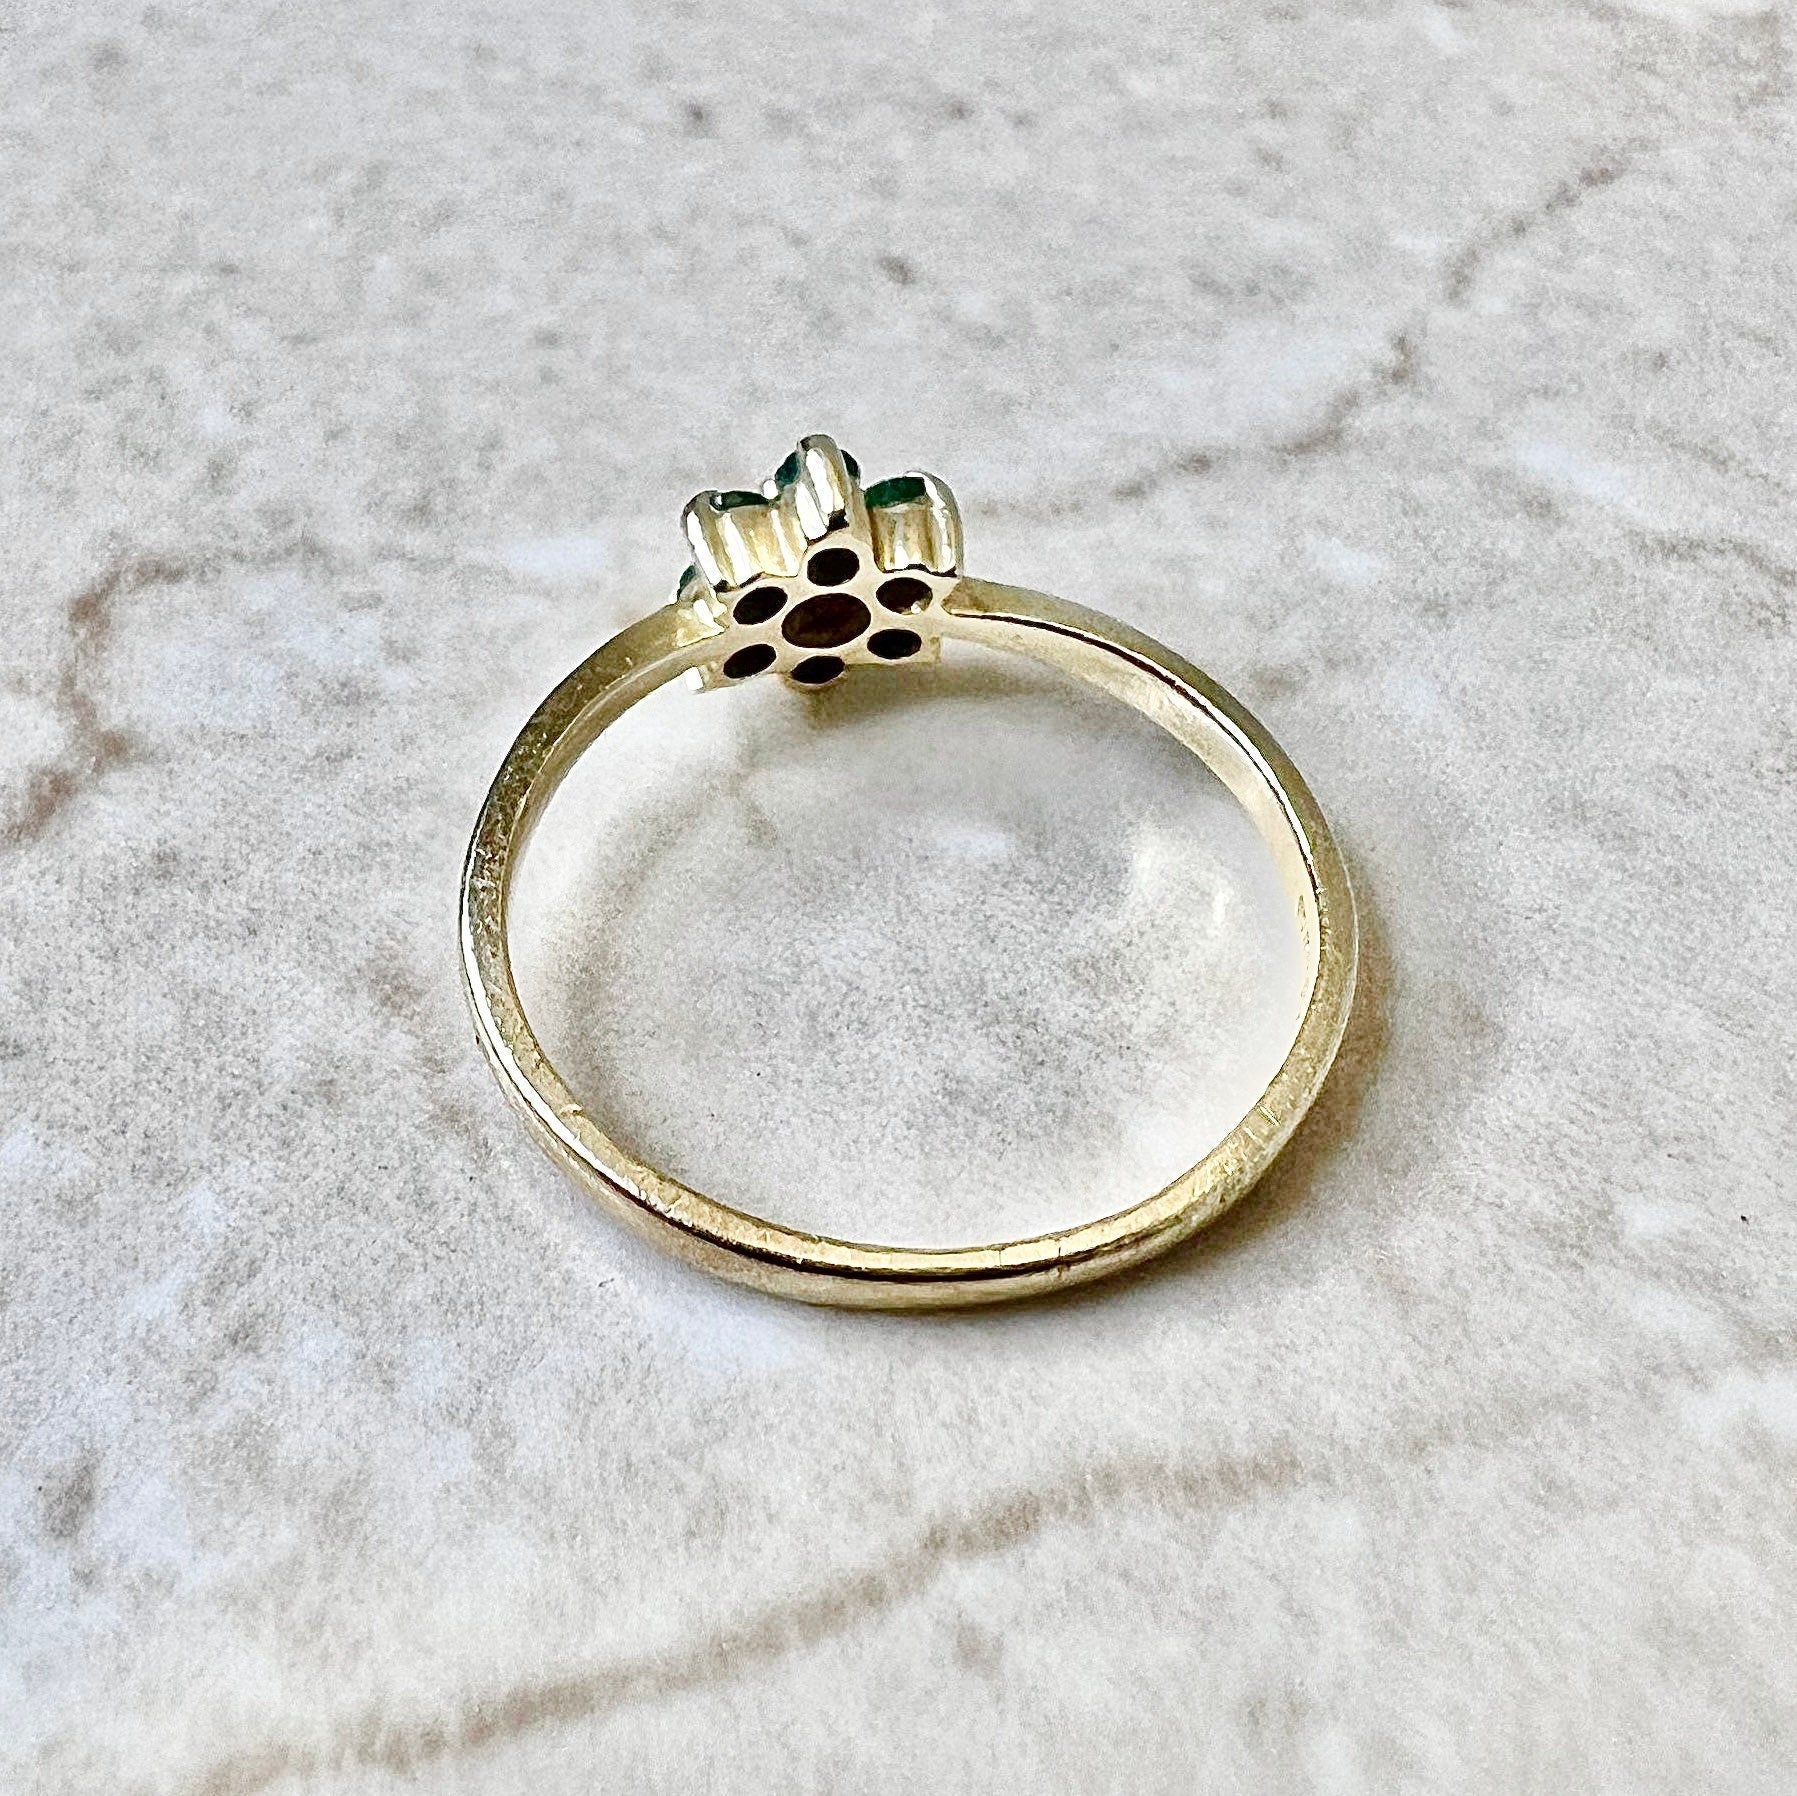 Vintage 14K Diamond & Natural Emerald Halo Ring - Yellow Gold Cocktail Ring - April May Brithstone - Holiday Gift For Her - Jewelry Sale